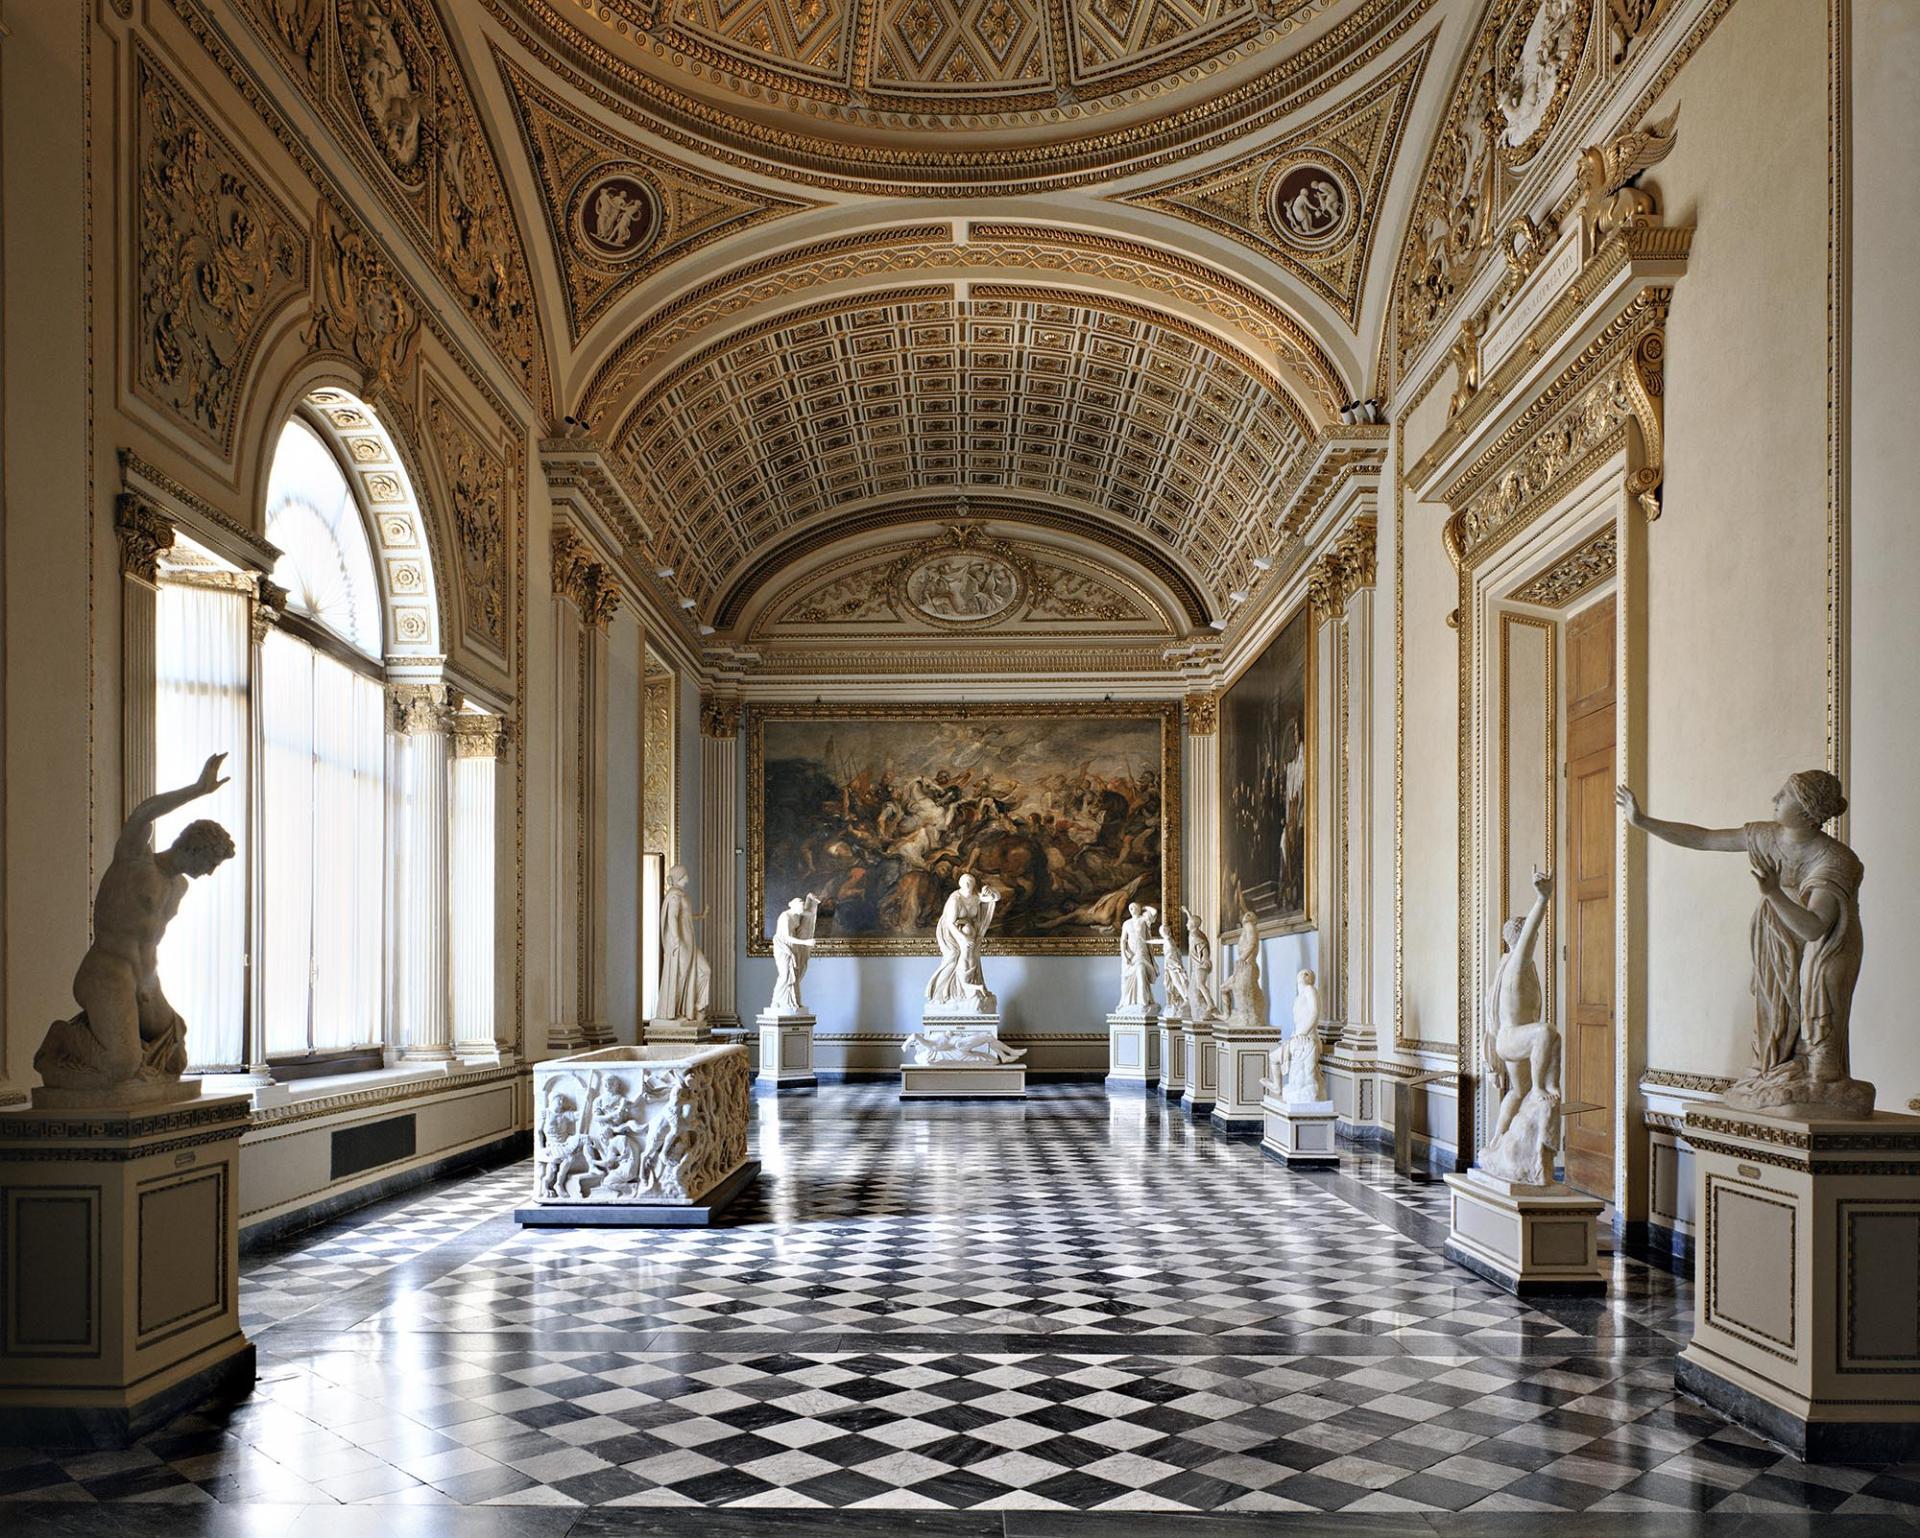 Massimo Listri
Uffizi XI, Firenze, 2009
C print
Signed and numbered edition of 5

39.5 x 47 inches Edition of 5  
47.5 × 59 inches Edition of 5  
71 x 88.75 inches Edition of 5

Florentine photographer Massimo Listri is fascinated how his